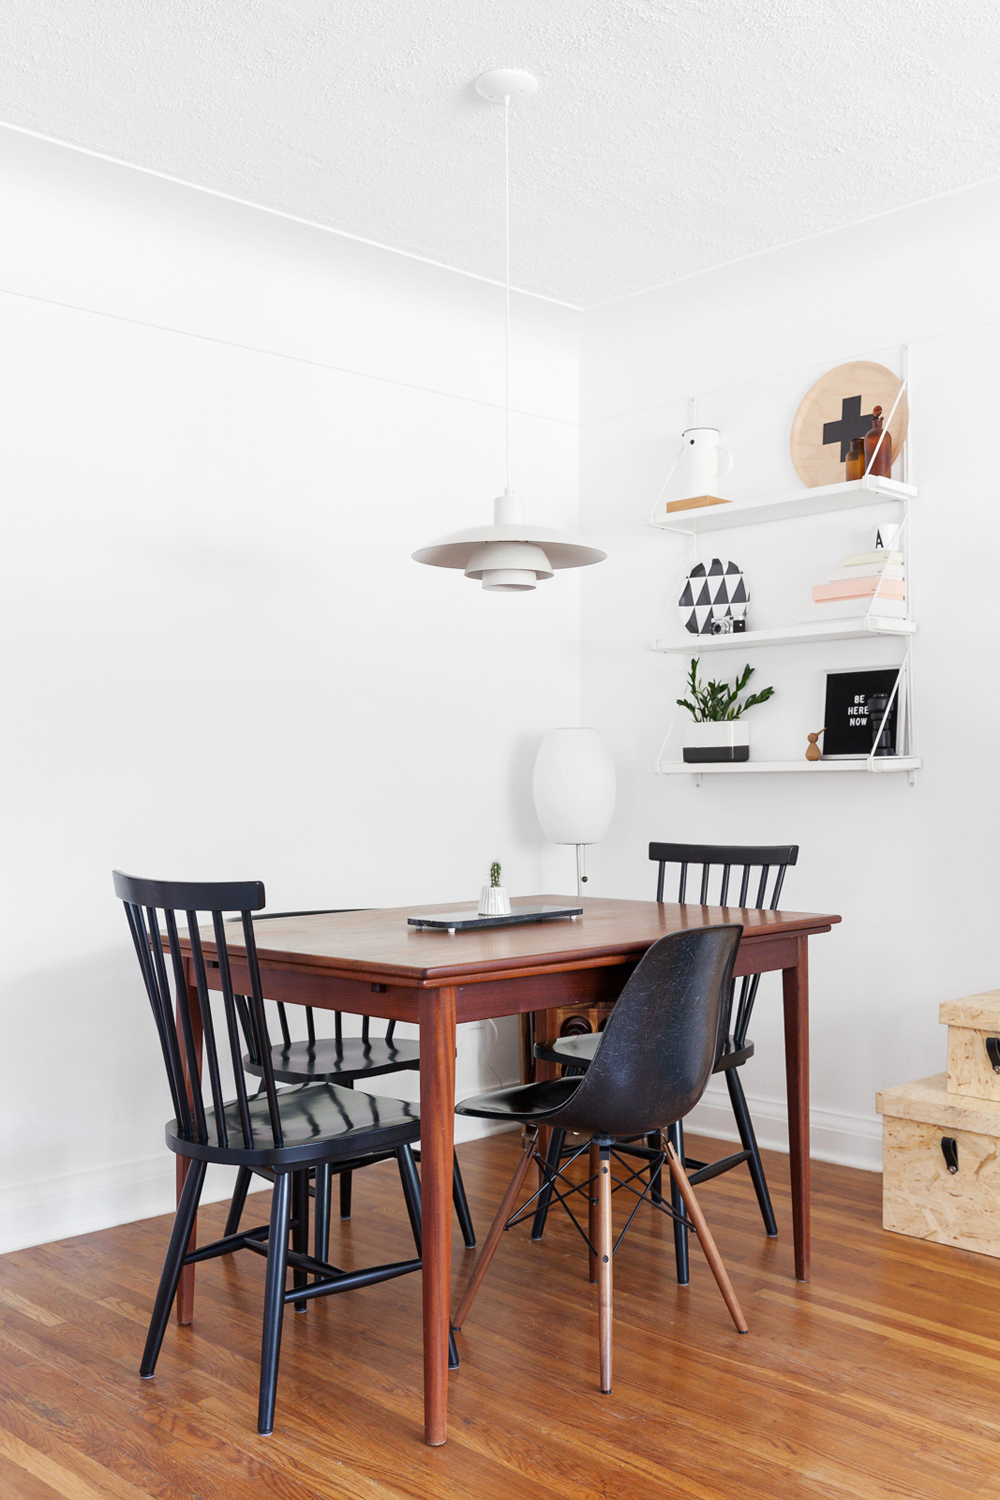 Dining room table that can be expanded to seat 10 people